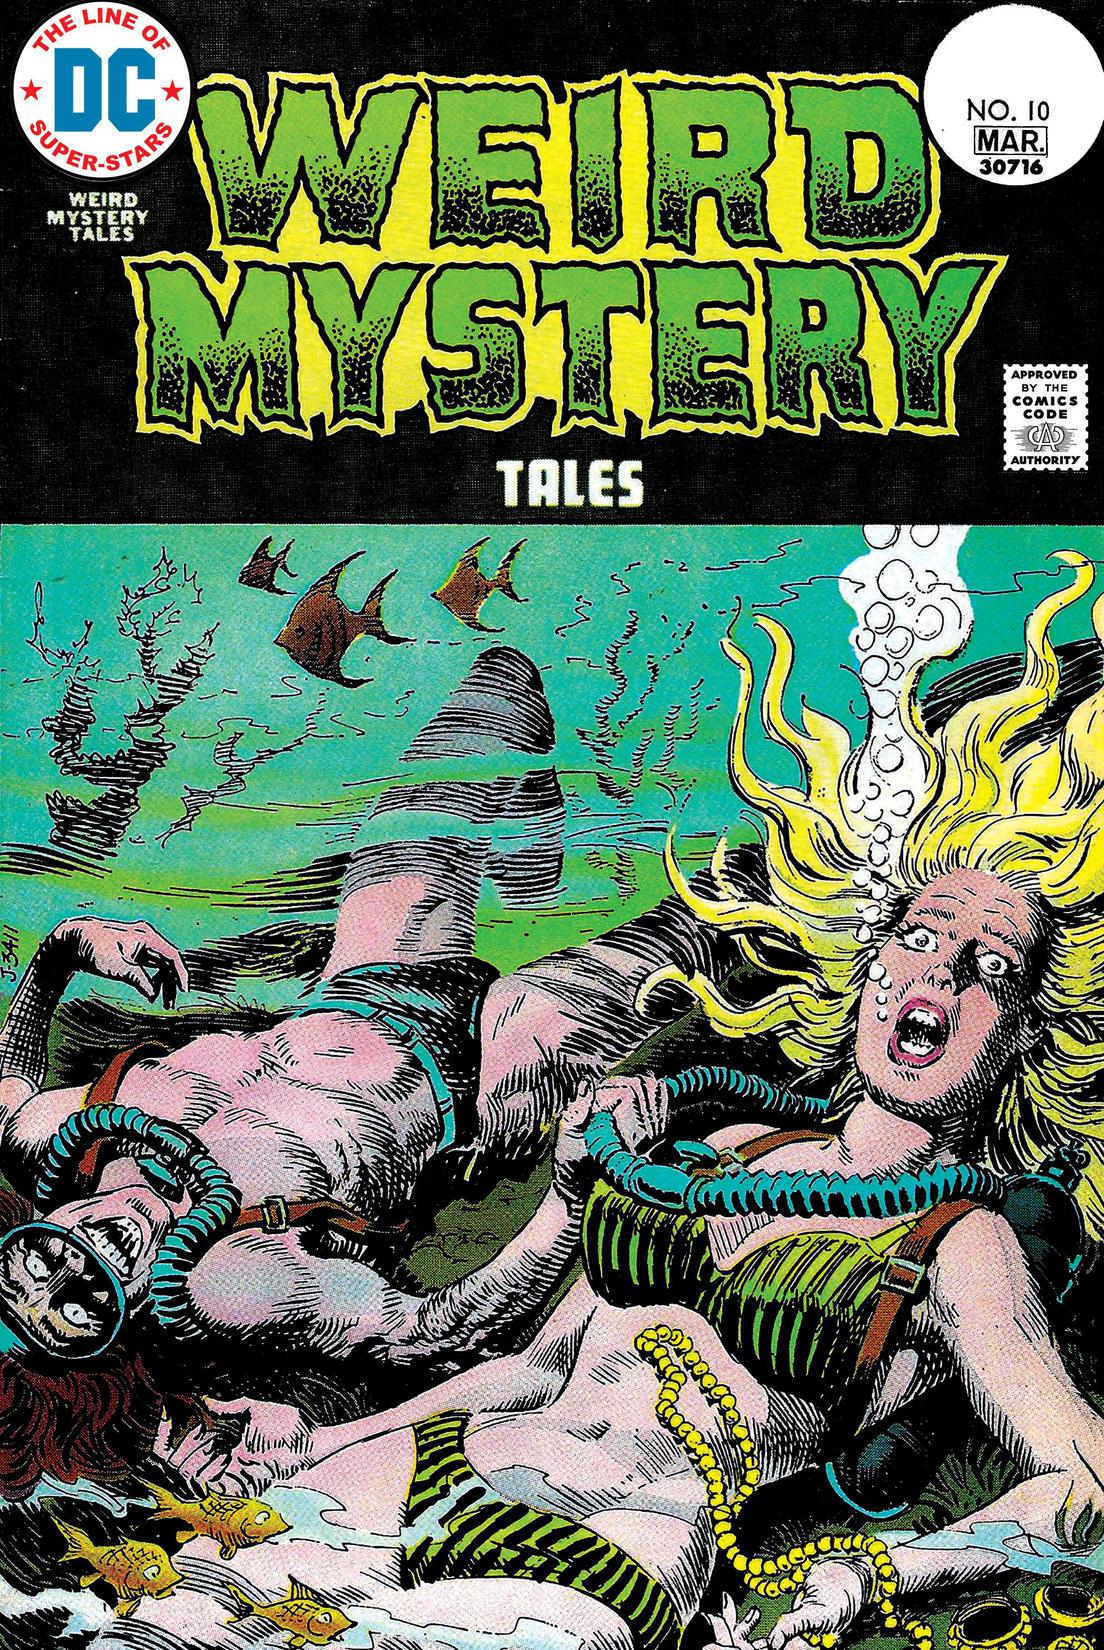 Weird Mystery Tales #10 preview images